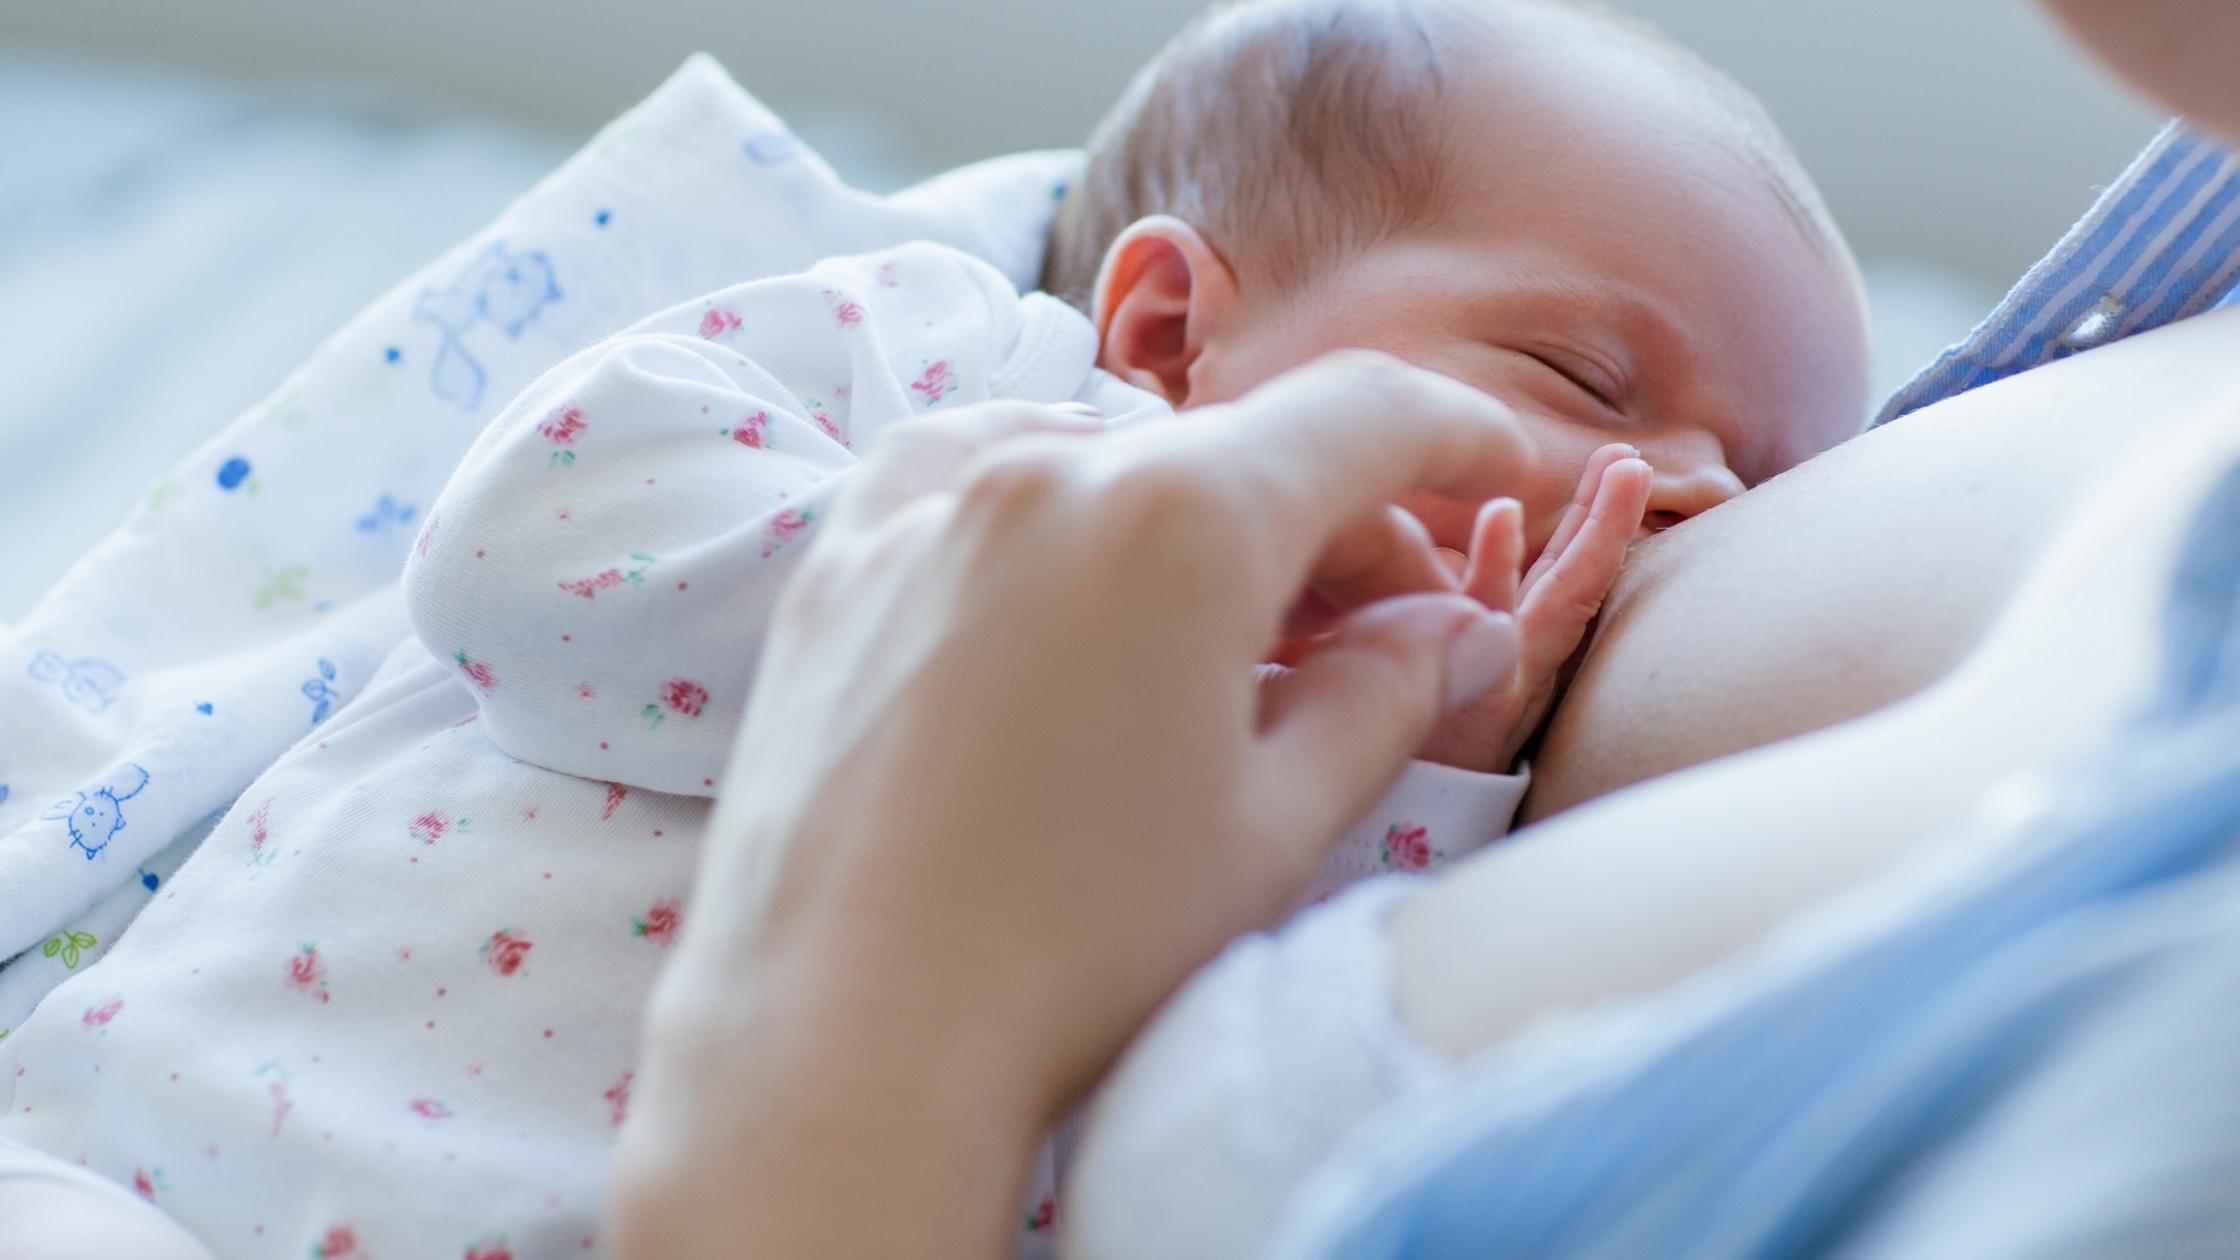 What Should You Avoid While Breastfeeding?